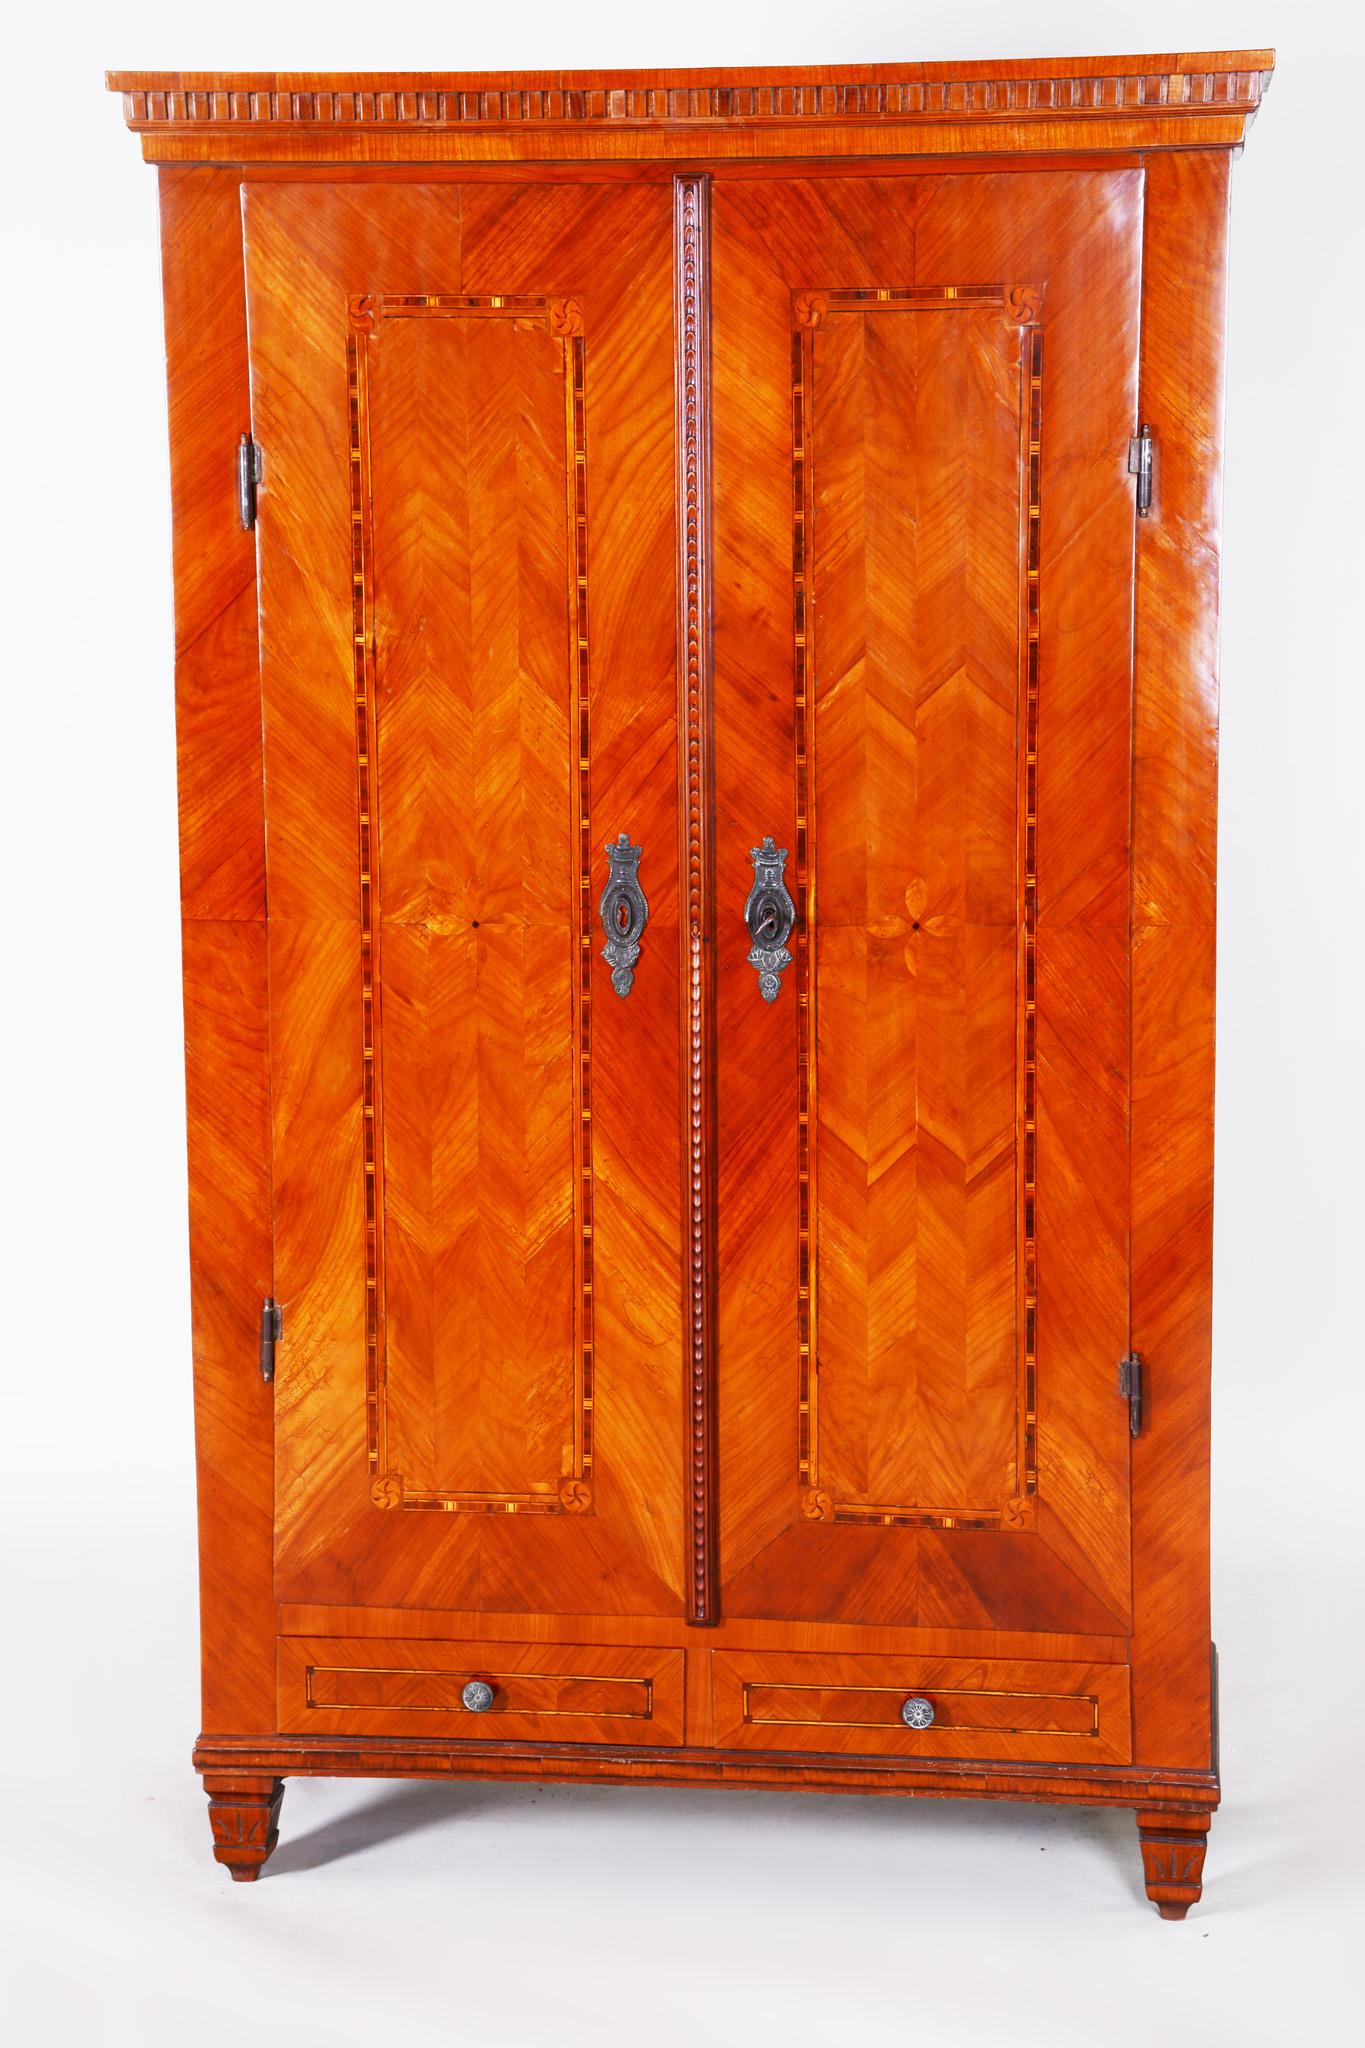 Exceptional classicist castle wardrobe. Very well-preserved and completely authentic with two drawers, decorated with marquetry and a typical classicist vaulting of the upper ledge and legs.

18th century classicist double-door wardrobe
Completely